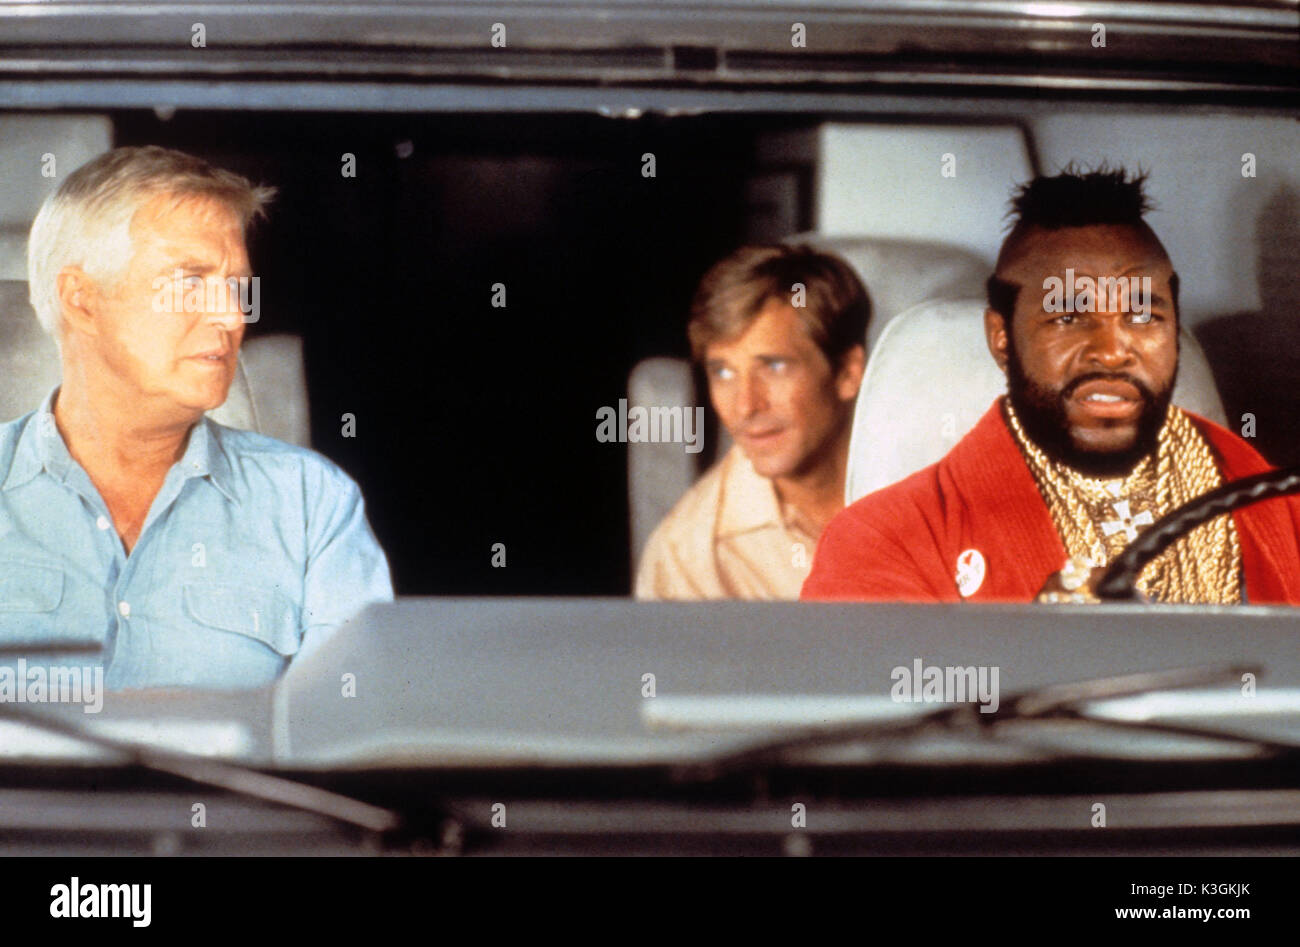 THE A-TEAM GEORGE PEPPARD as Hannibal Smith, DIRK BENEDICT as Faceman, MR T as BA Baracus Stock Photo